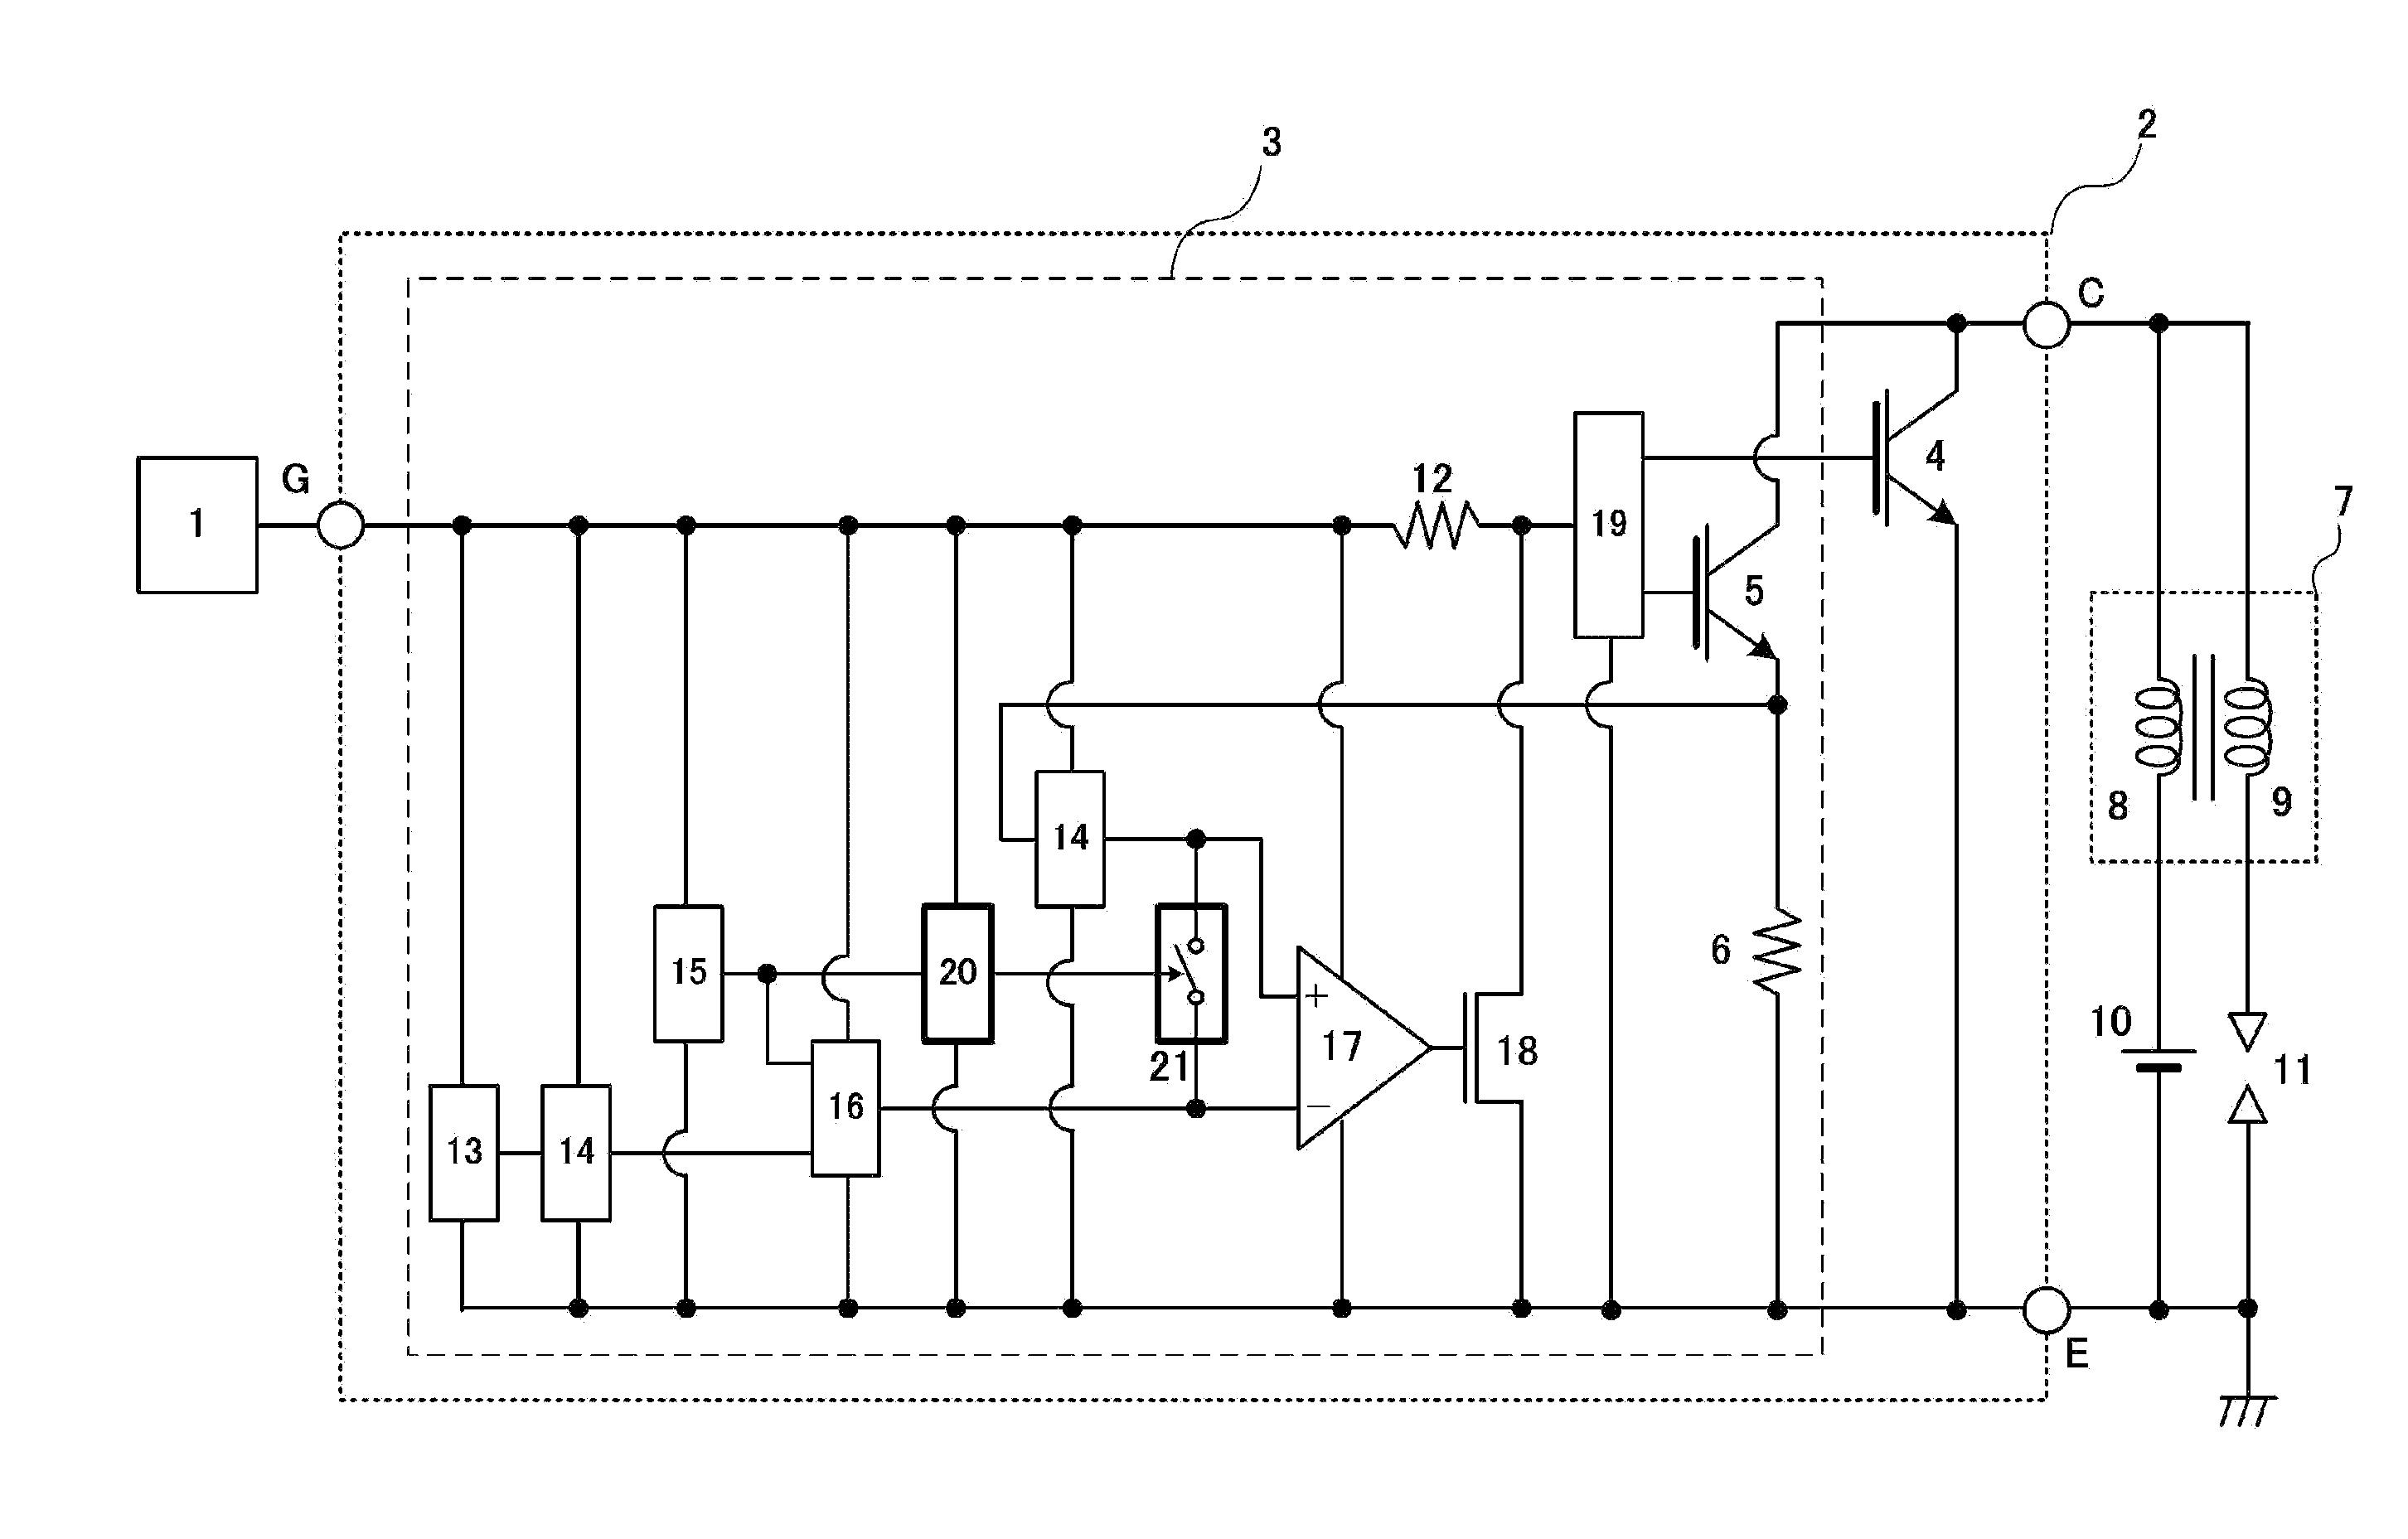 Semiconductor device providing a current control function and a self shut down function